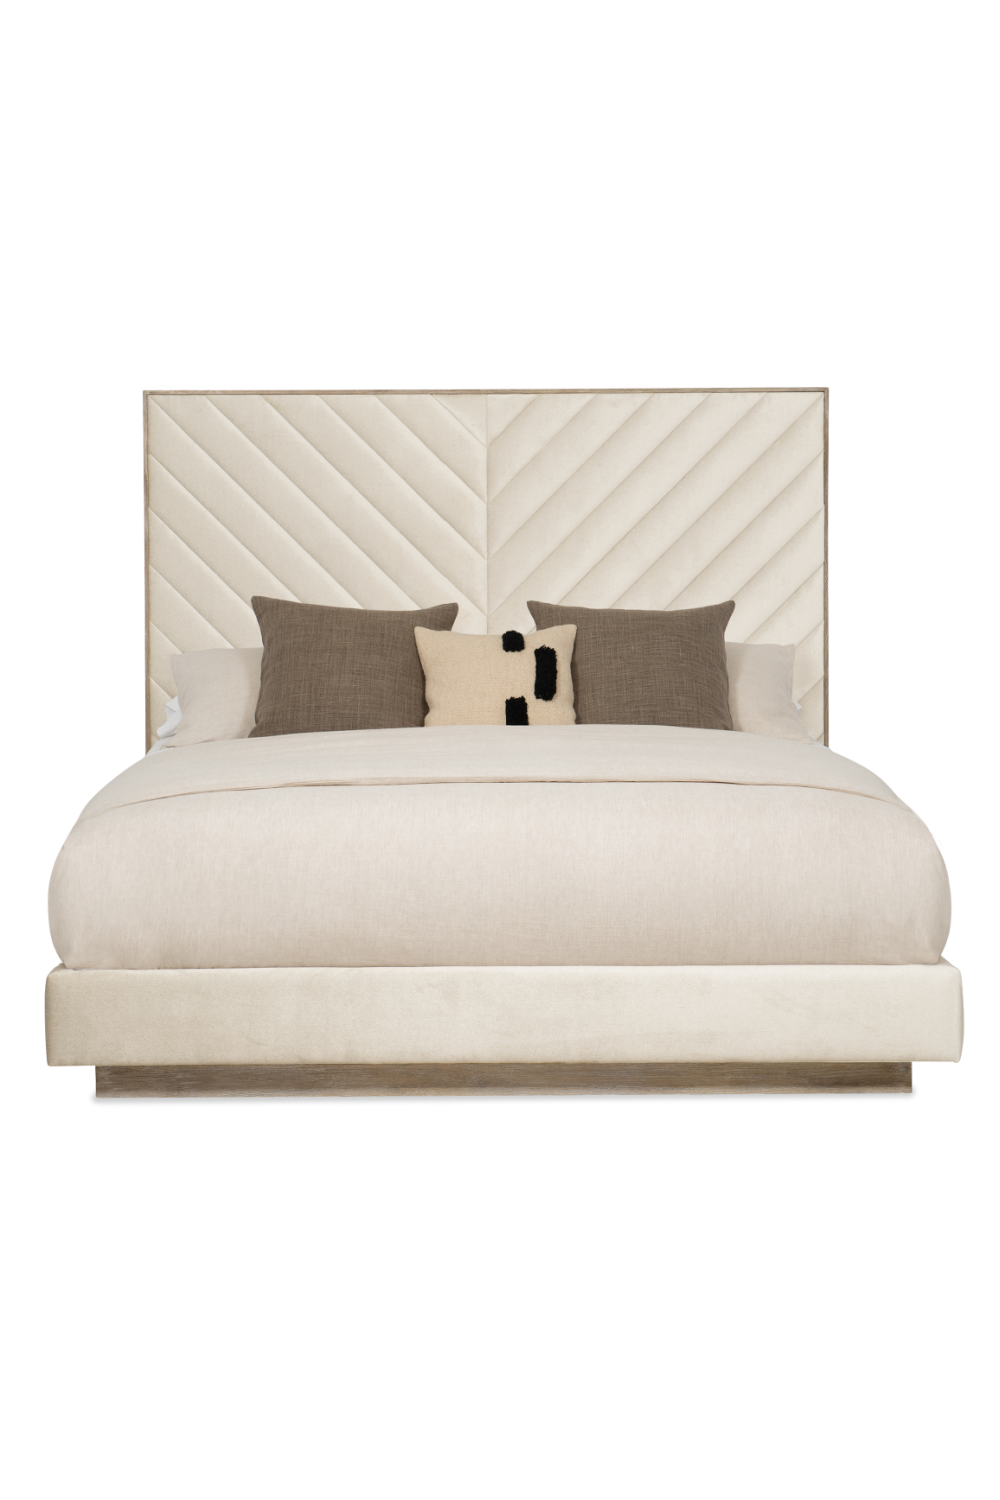 Ash Wood Upholstered Bed | Caracole Meet U In The Middle | Oroa.com